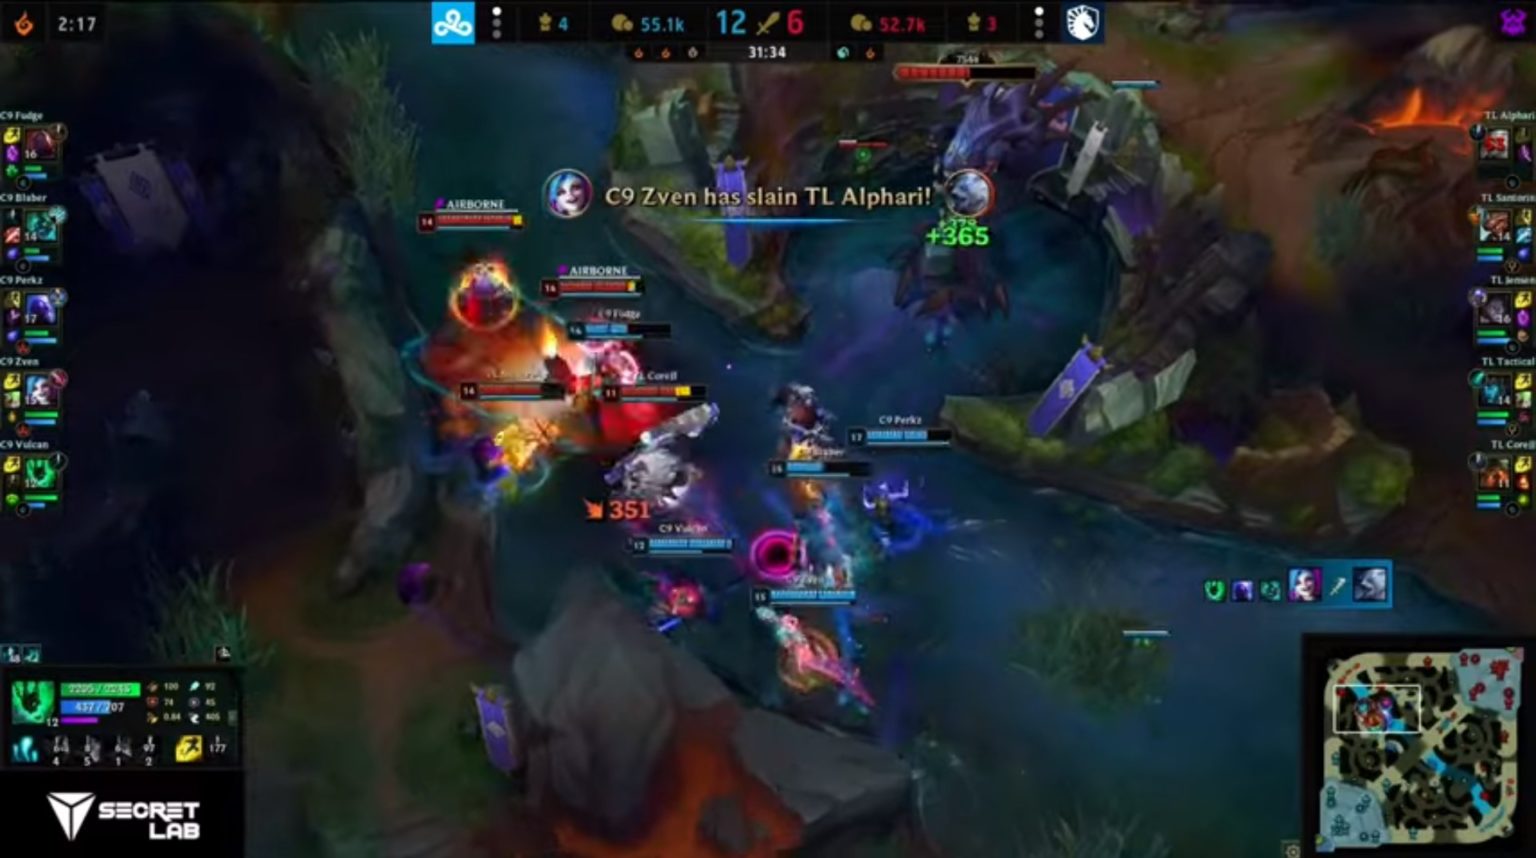 Zven killed Alphari to Get Excited! for a Quadra Kill in Game 3.